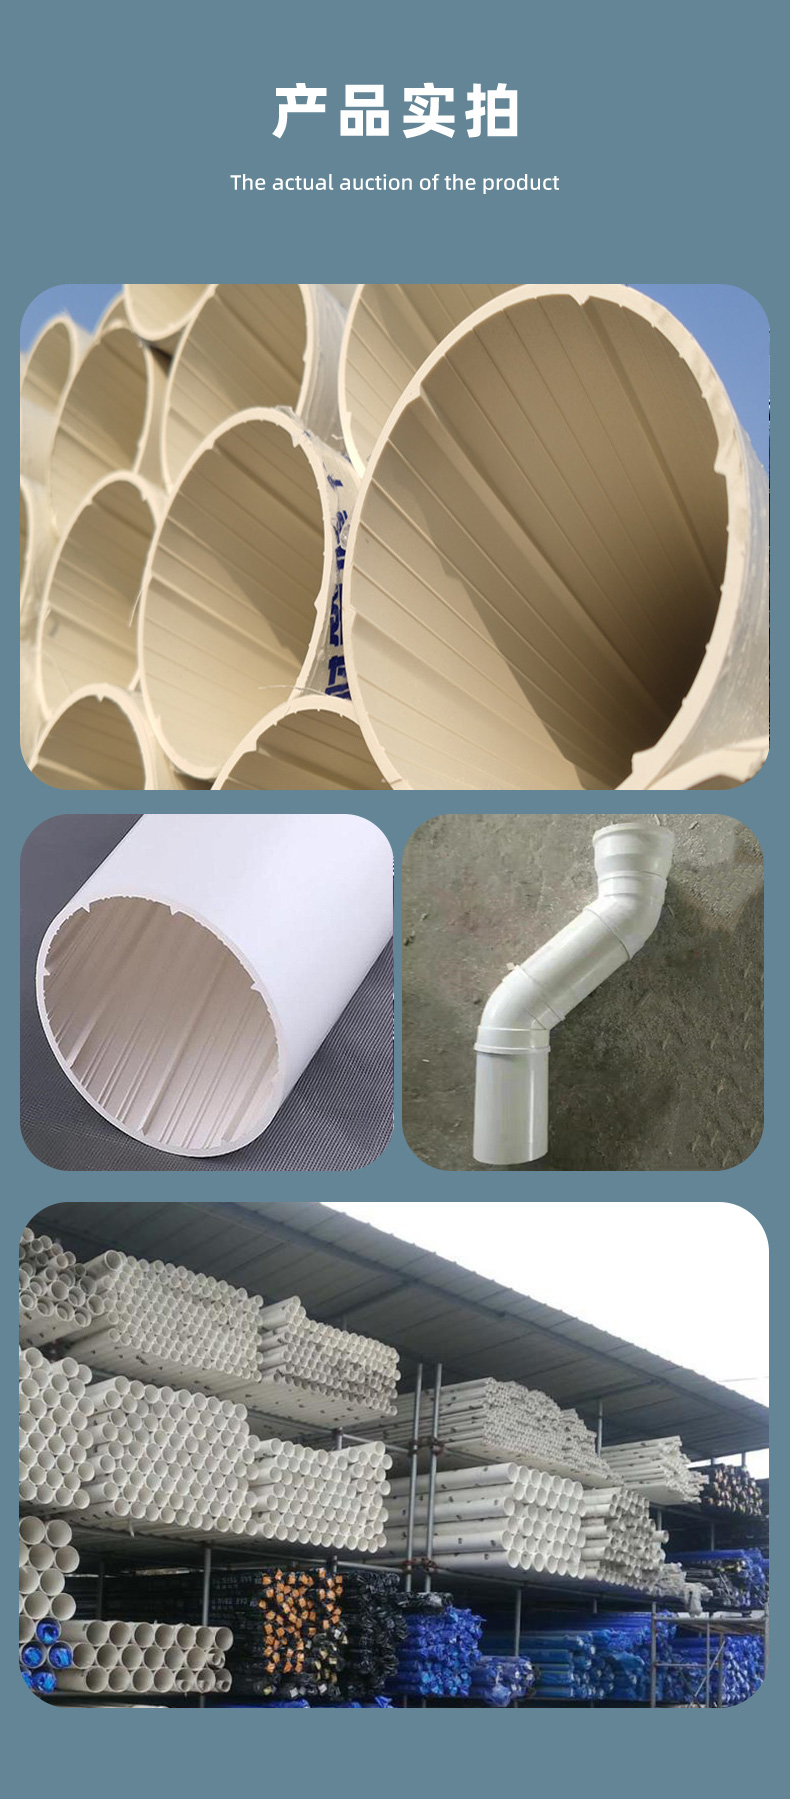 Liansu PVC drainage pipe, UPVC solid wall spiral silencing pipe, rainwater pipe, drainage A-type pipe